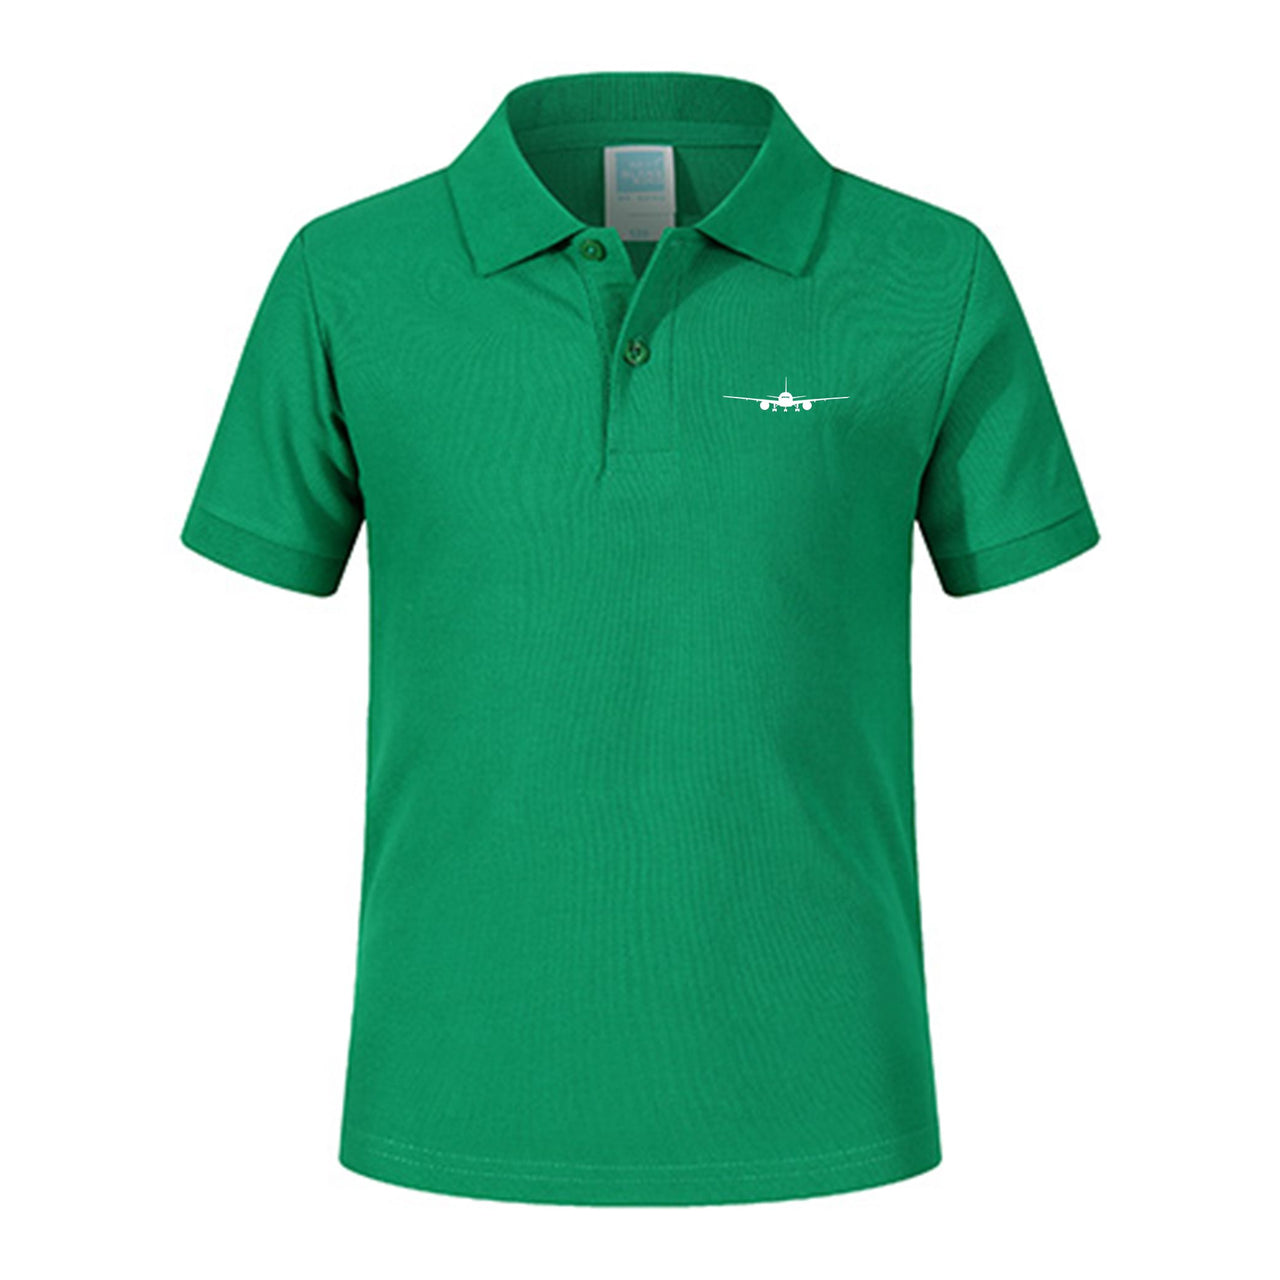 Boeing 777 Silhouette Designed Children Polo T-Shirts